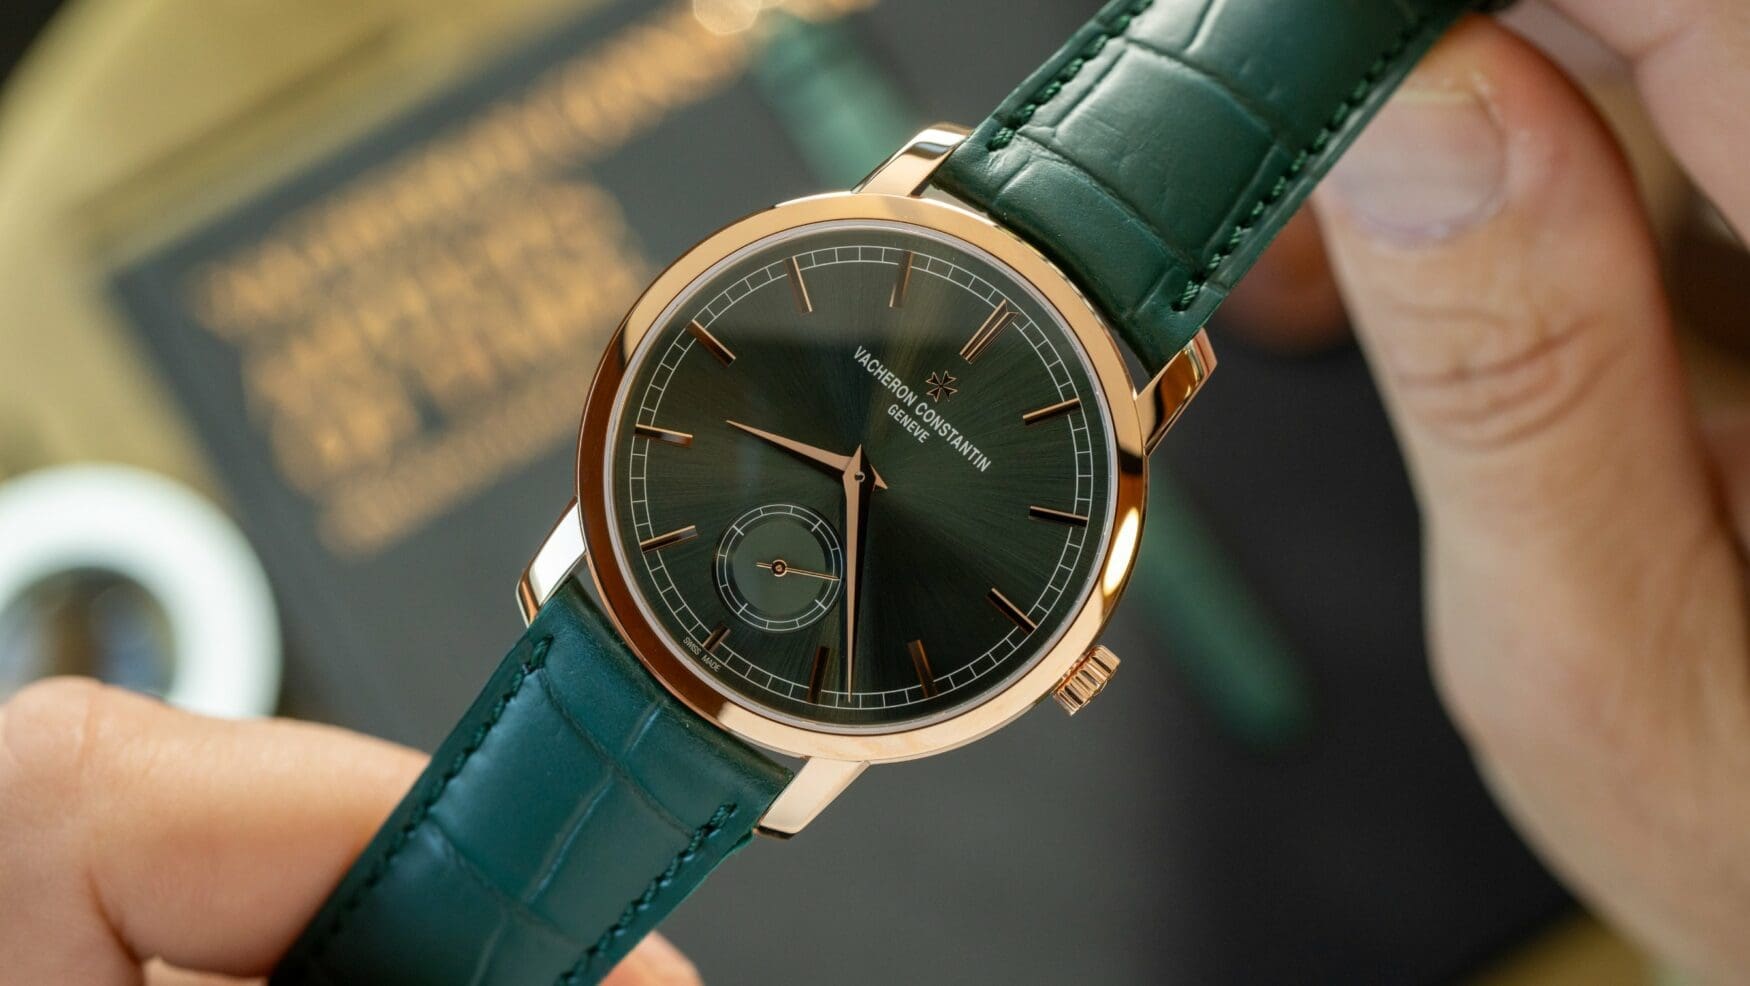 This Vacheron Constantin Traditionnelle in green is the quintessential dress watch